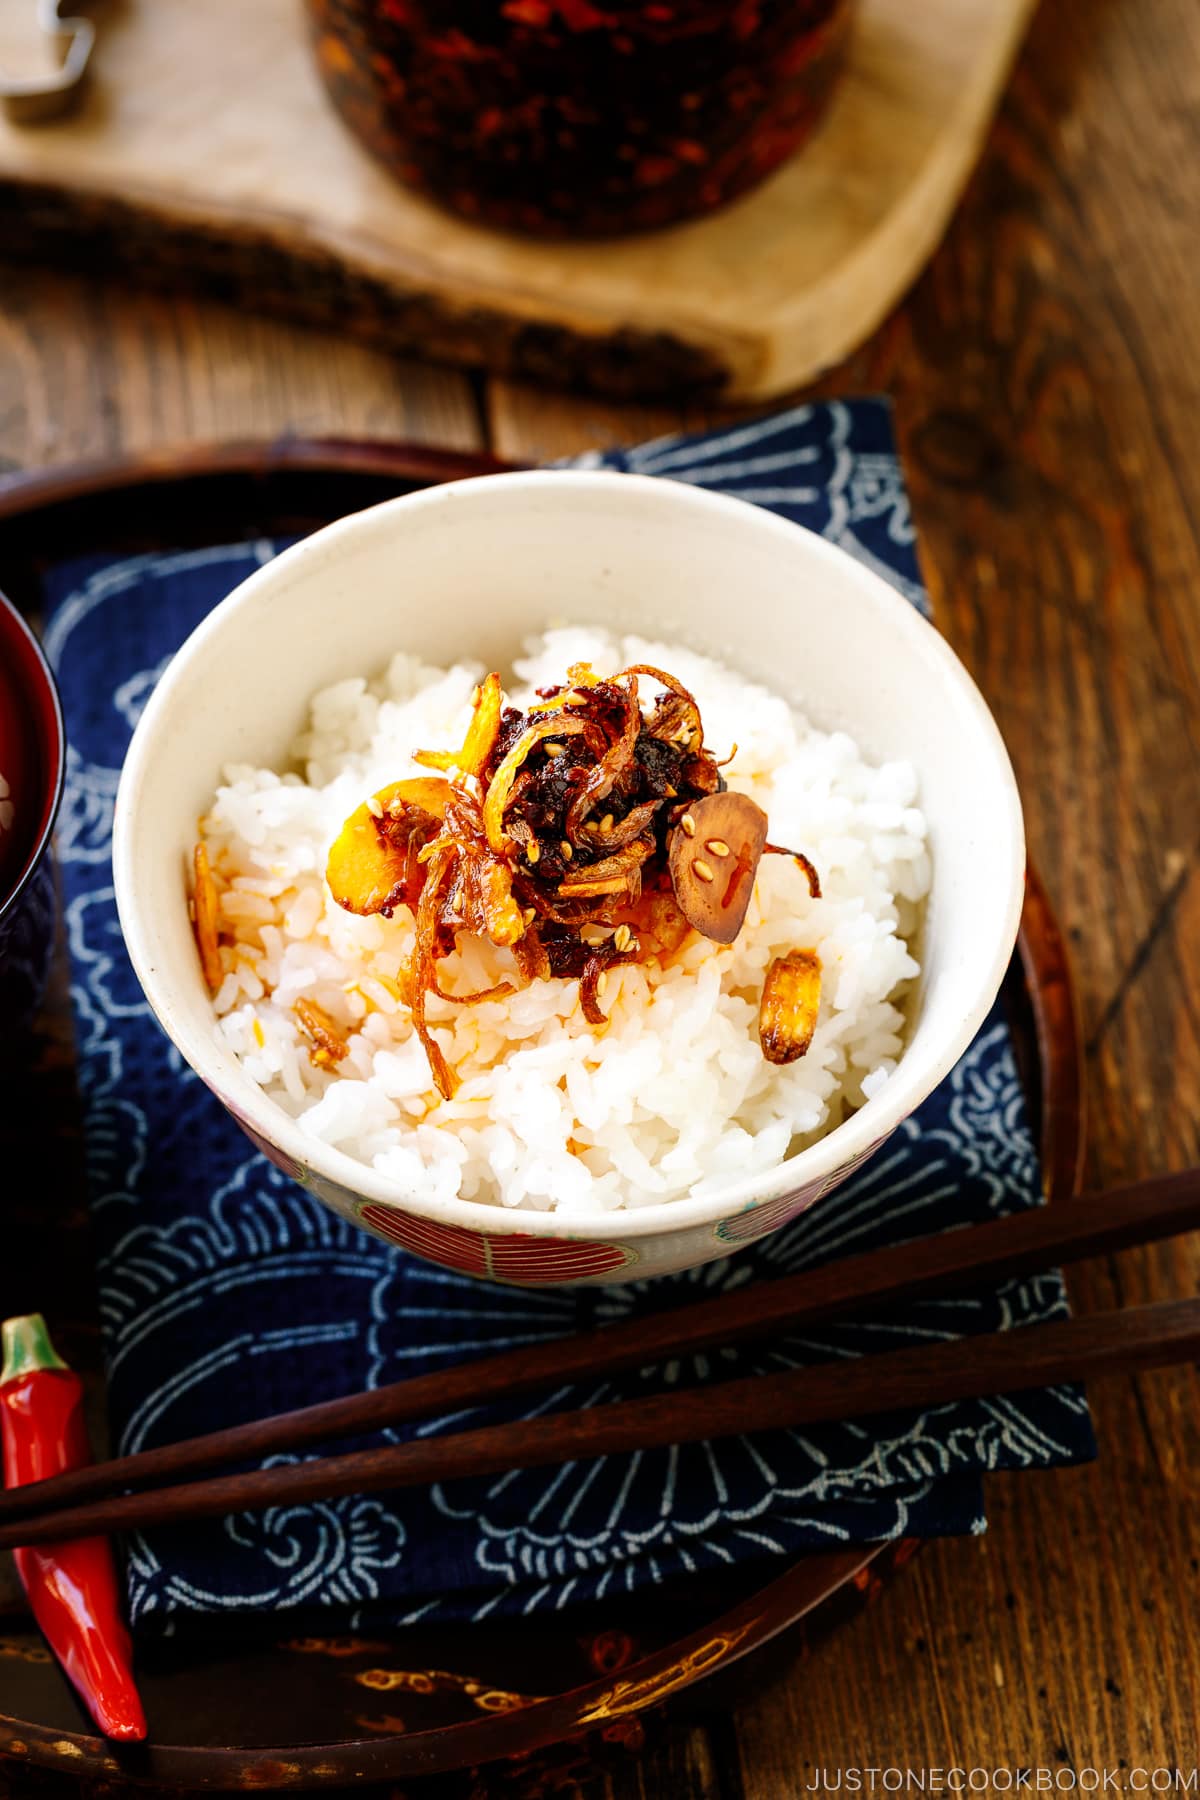 A Japanese rice bowl containing steamed rice topped with Crunchy Garlic Chili Oil.